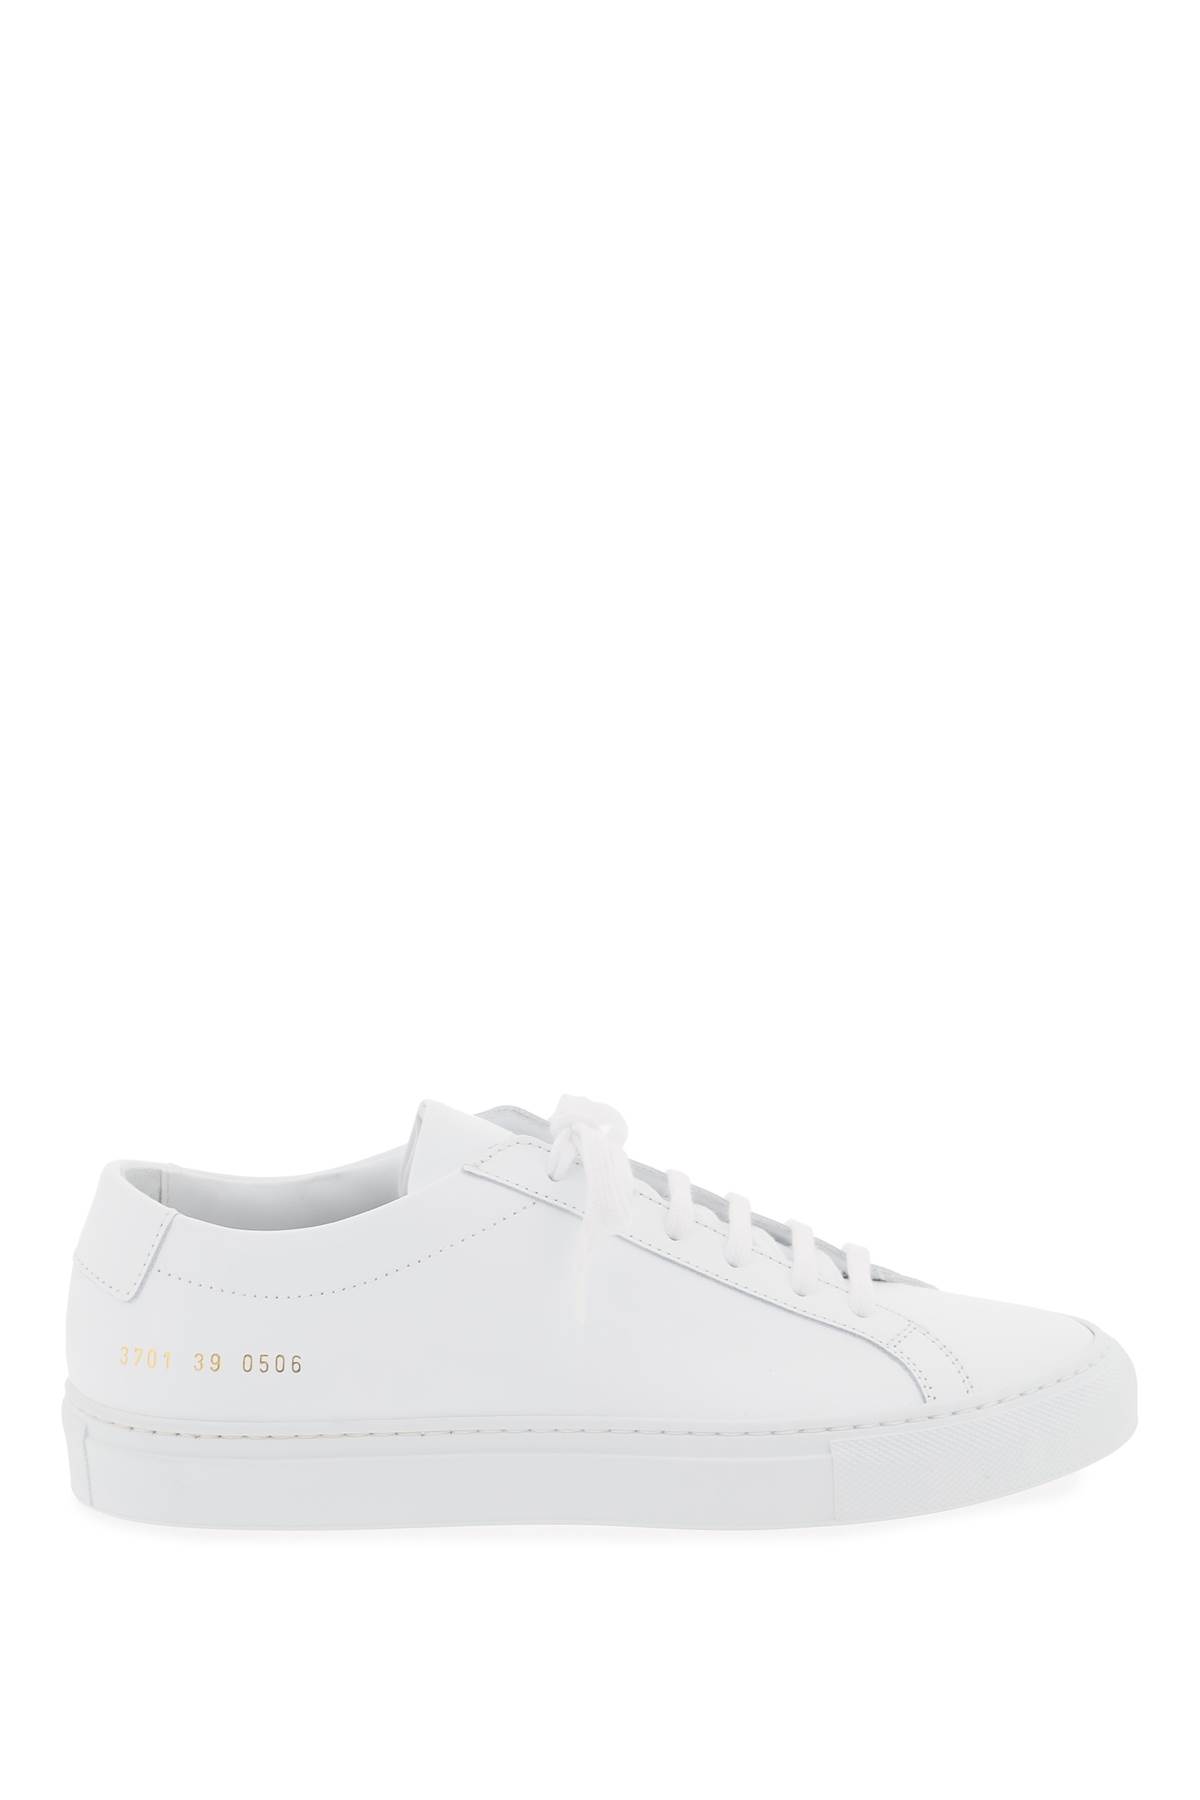 Common Projects Original Achilles Leather Sneakers In White (white)